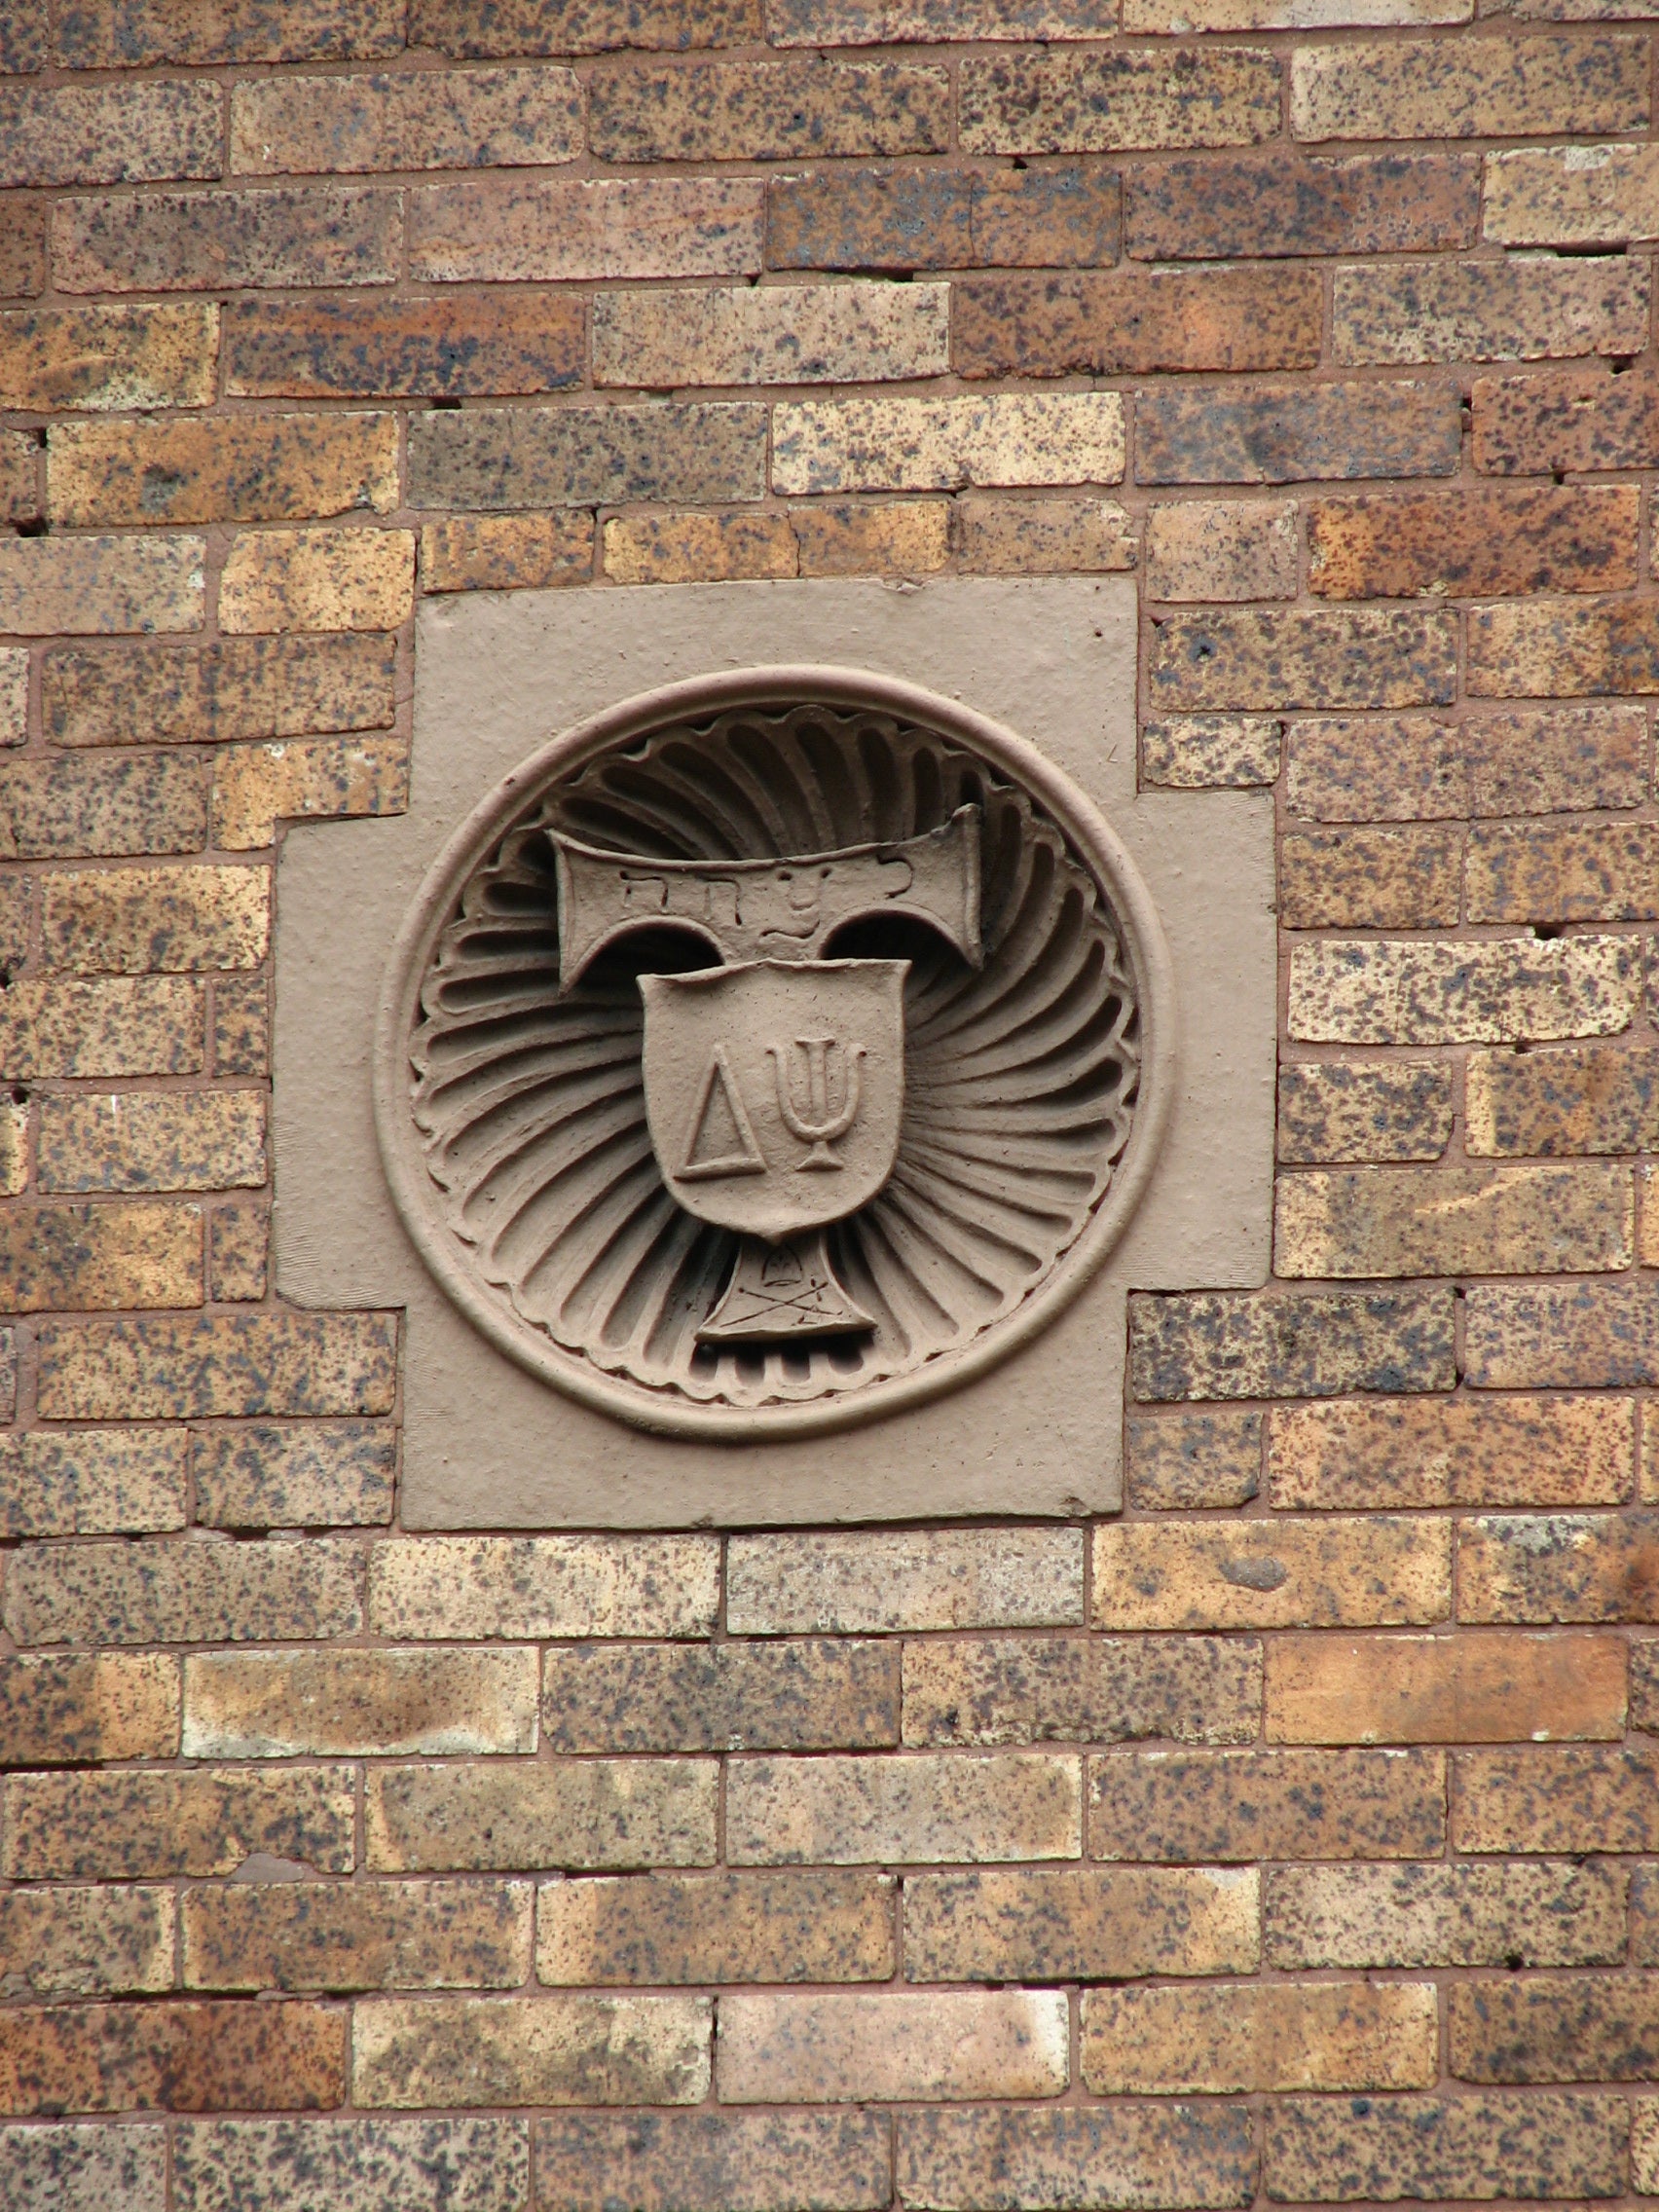 The symbol of the national literary society is carved into the façade.